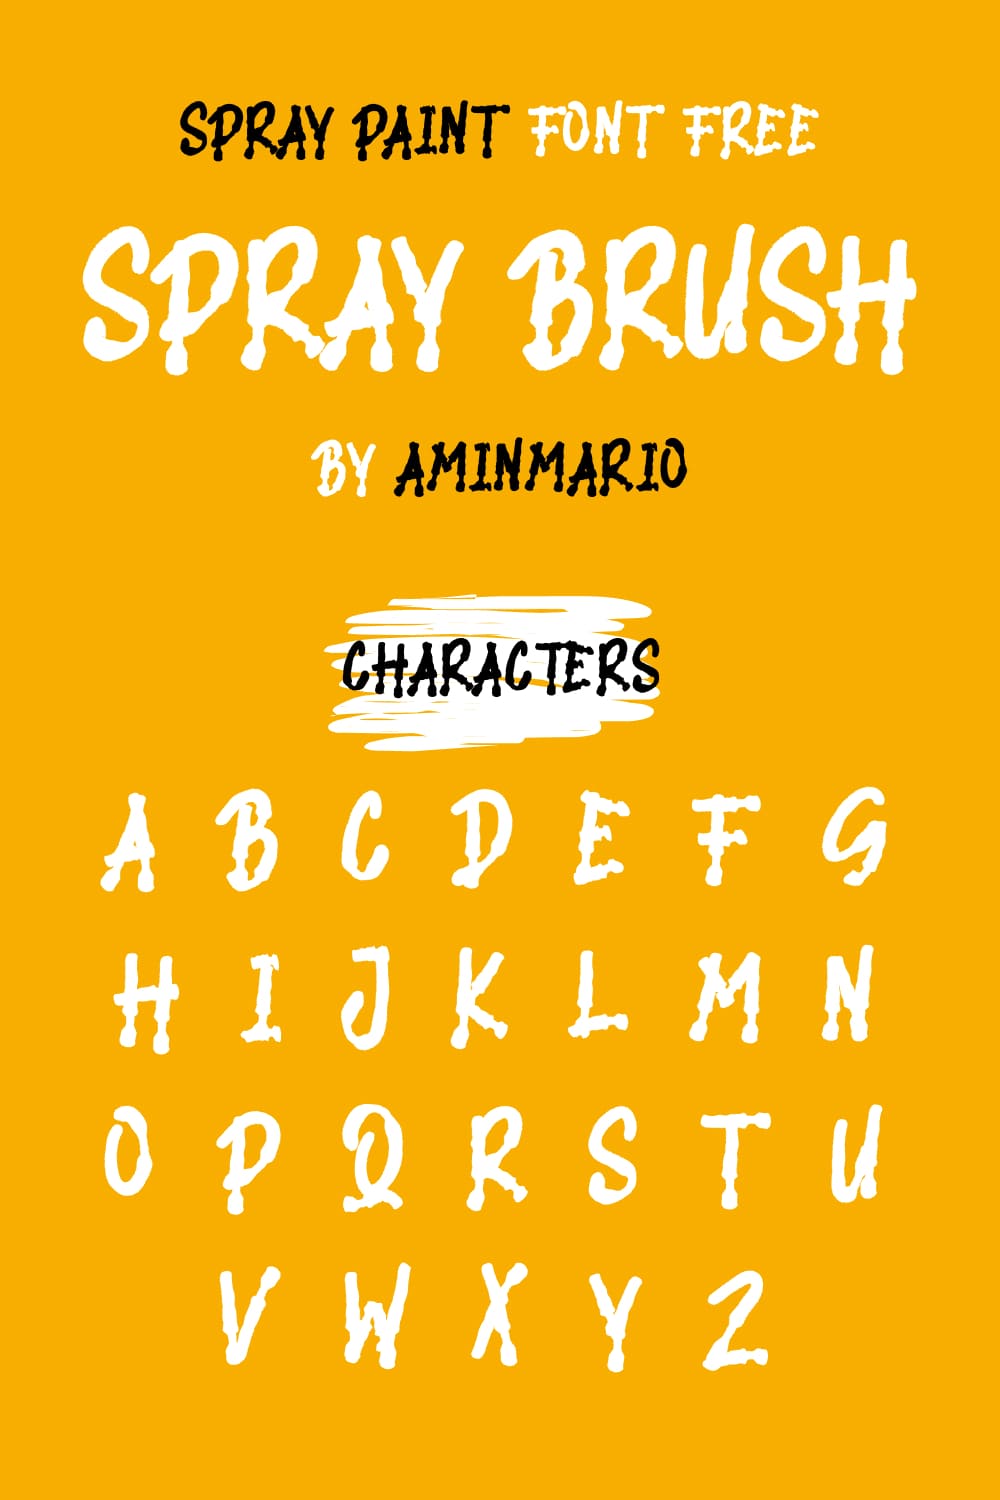 Characters Pinterest preview for Spray Brush - spray paint font free by MasterBundles.